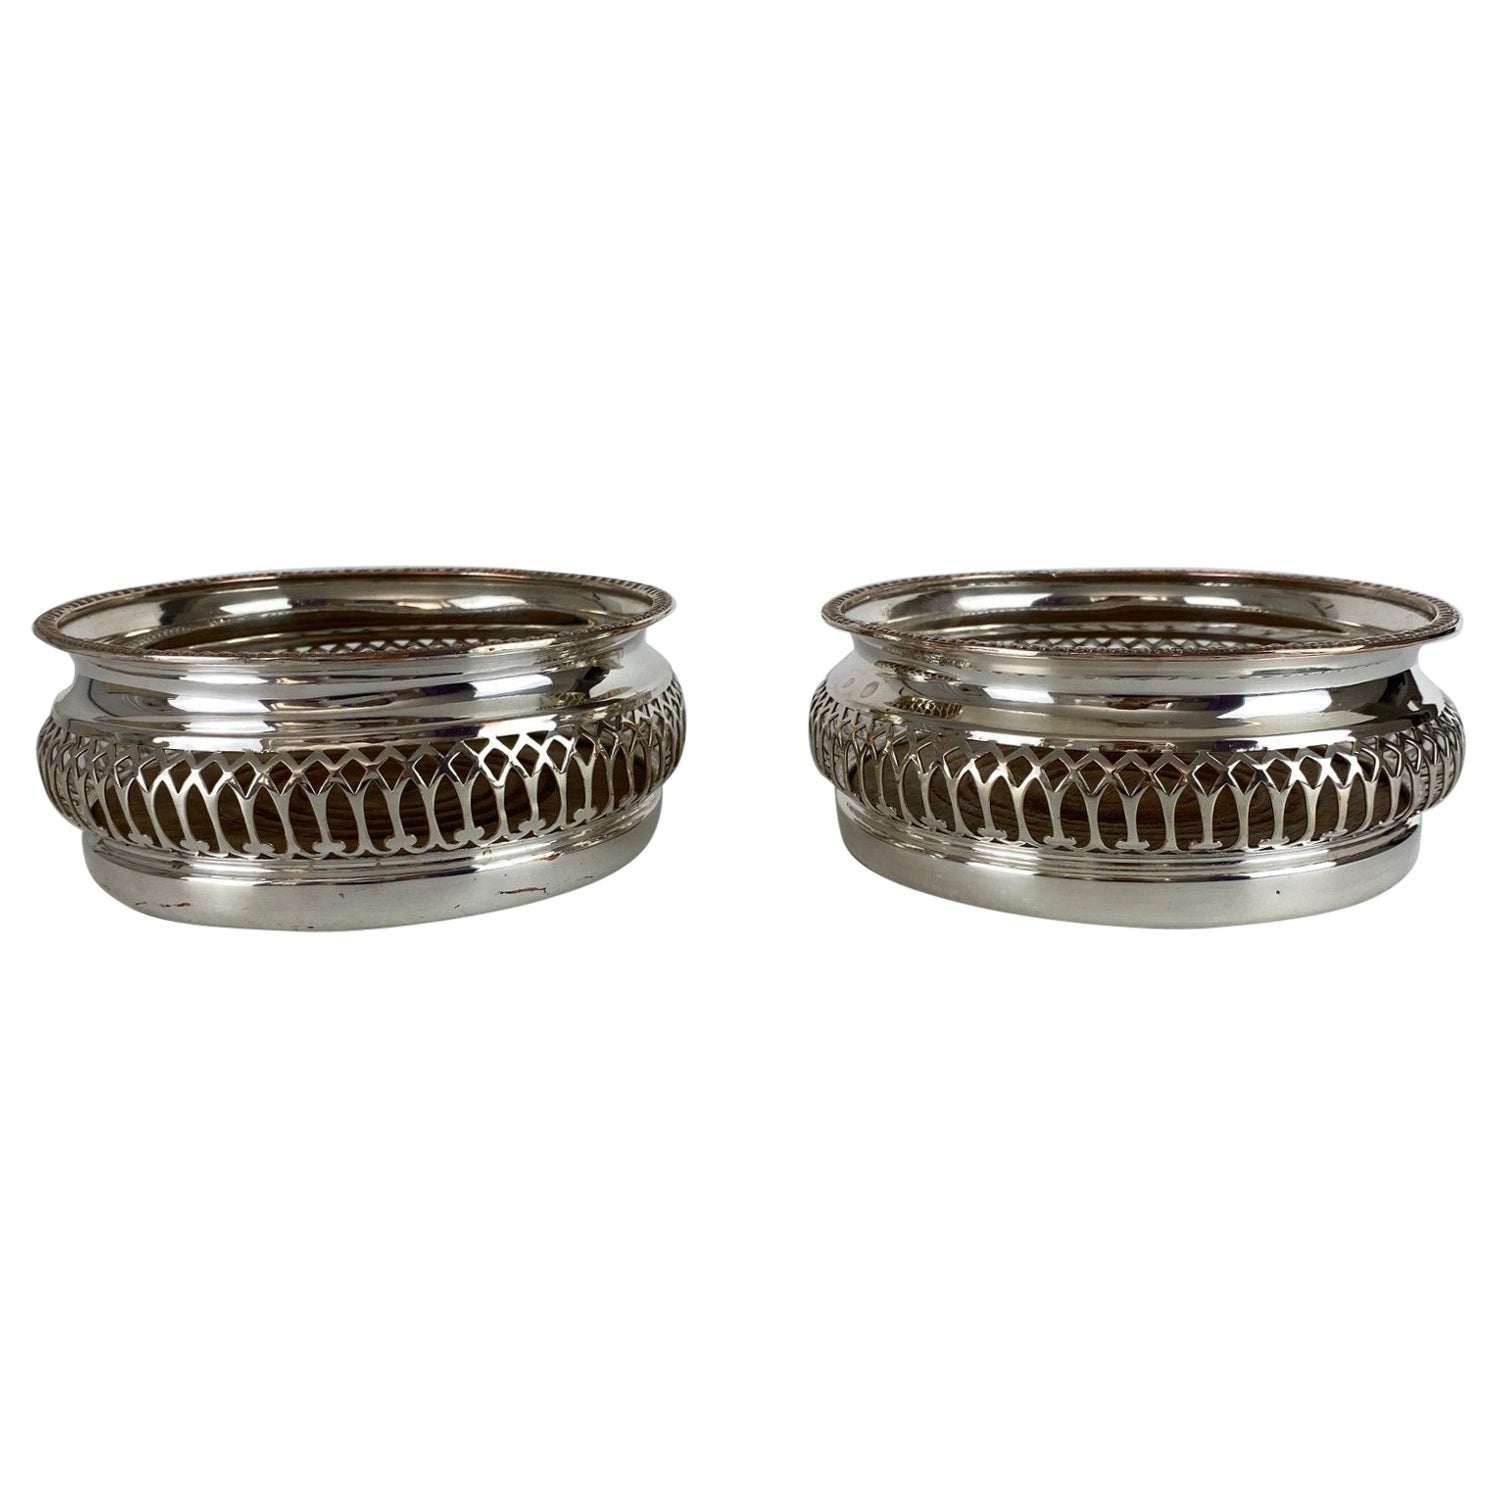 19th Century English Silver Plate Vine Coaster Set of 2 For Sale